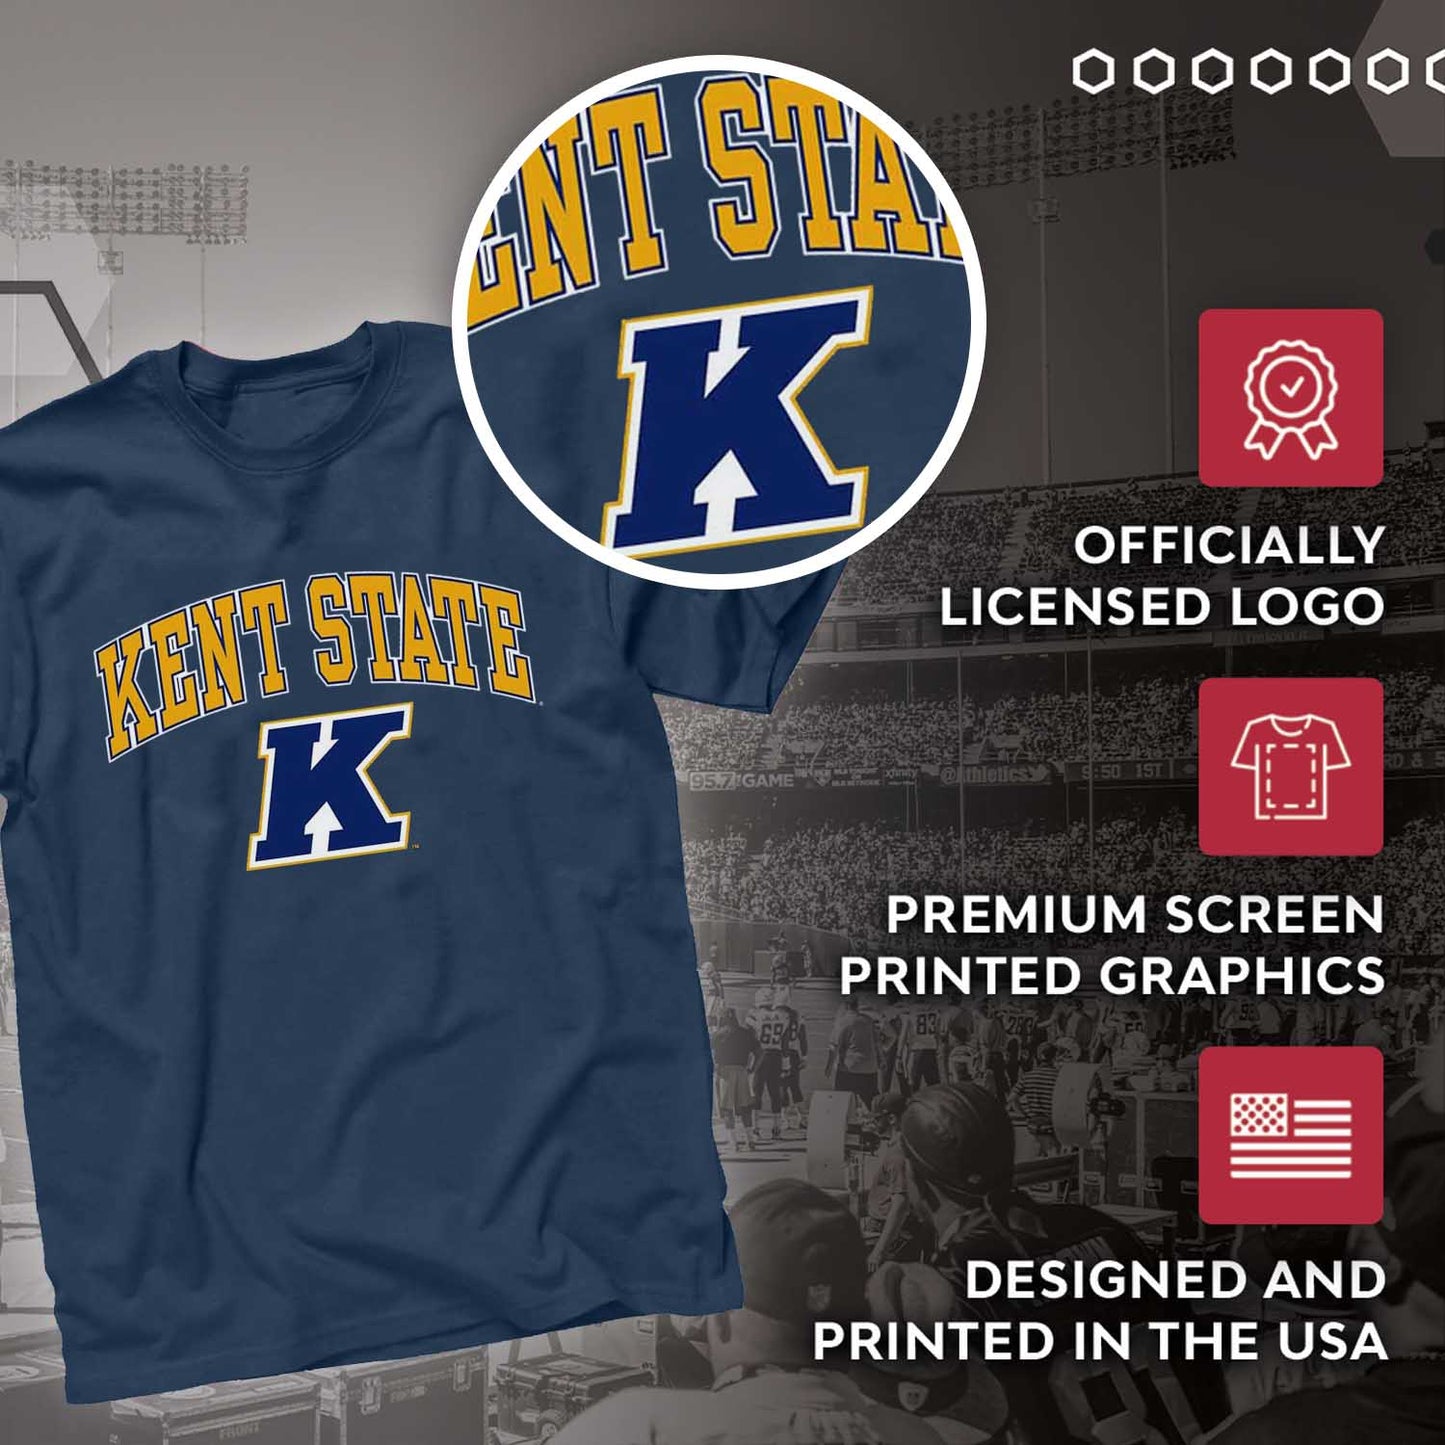 Kent State Golden Flashes NCAA Adult Gameday Cotton T-Shirt - Navy